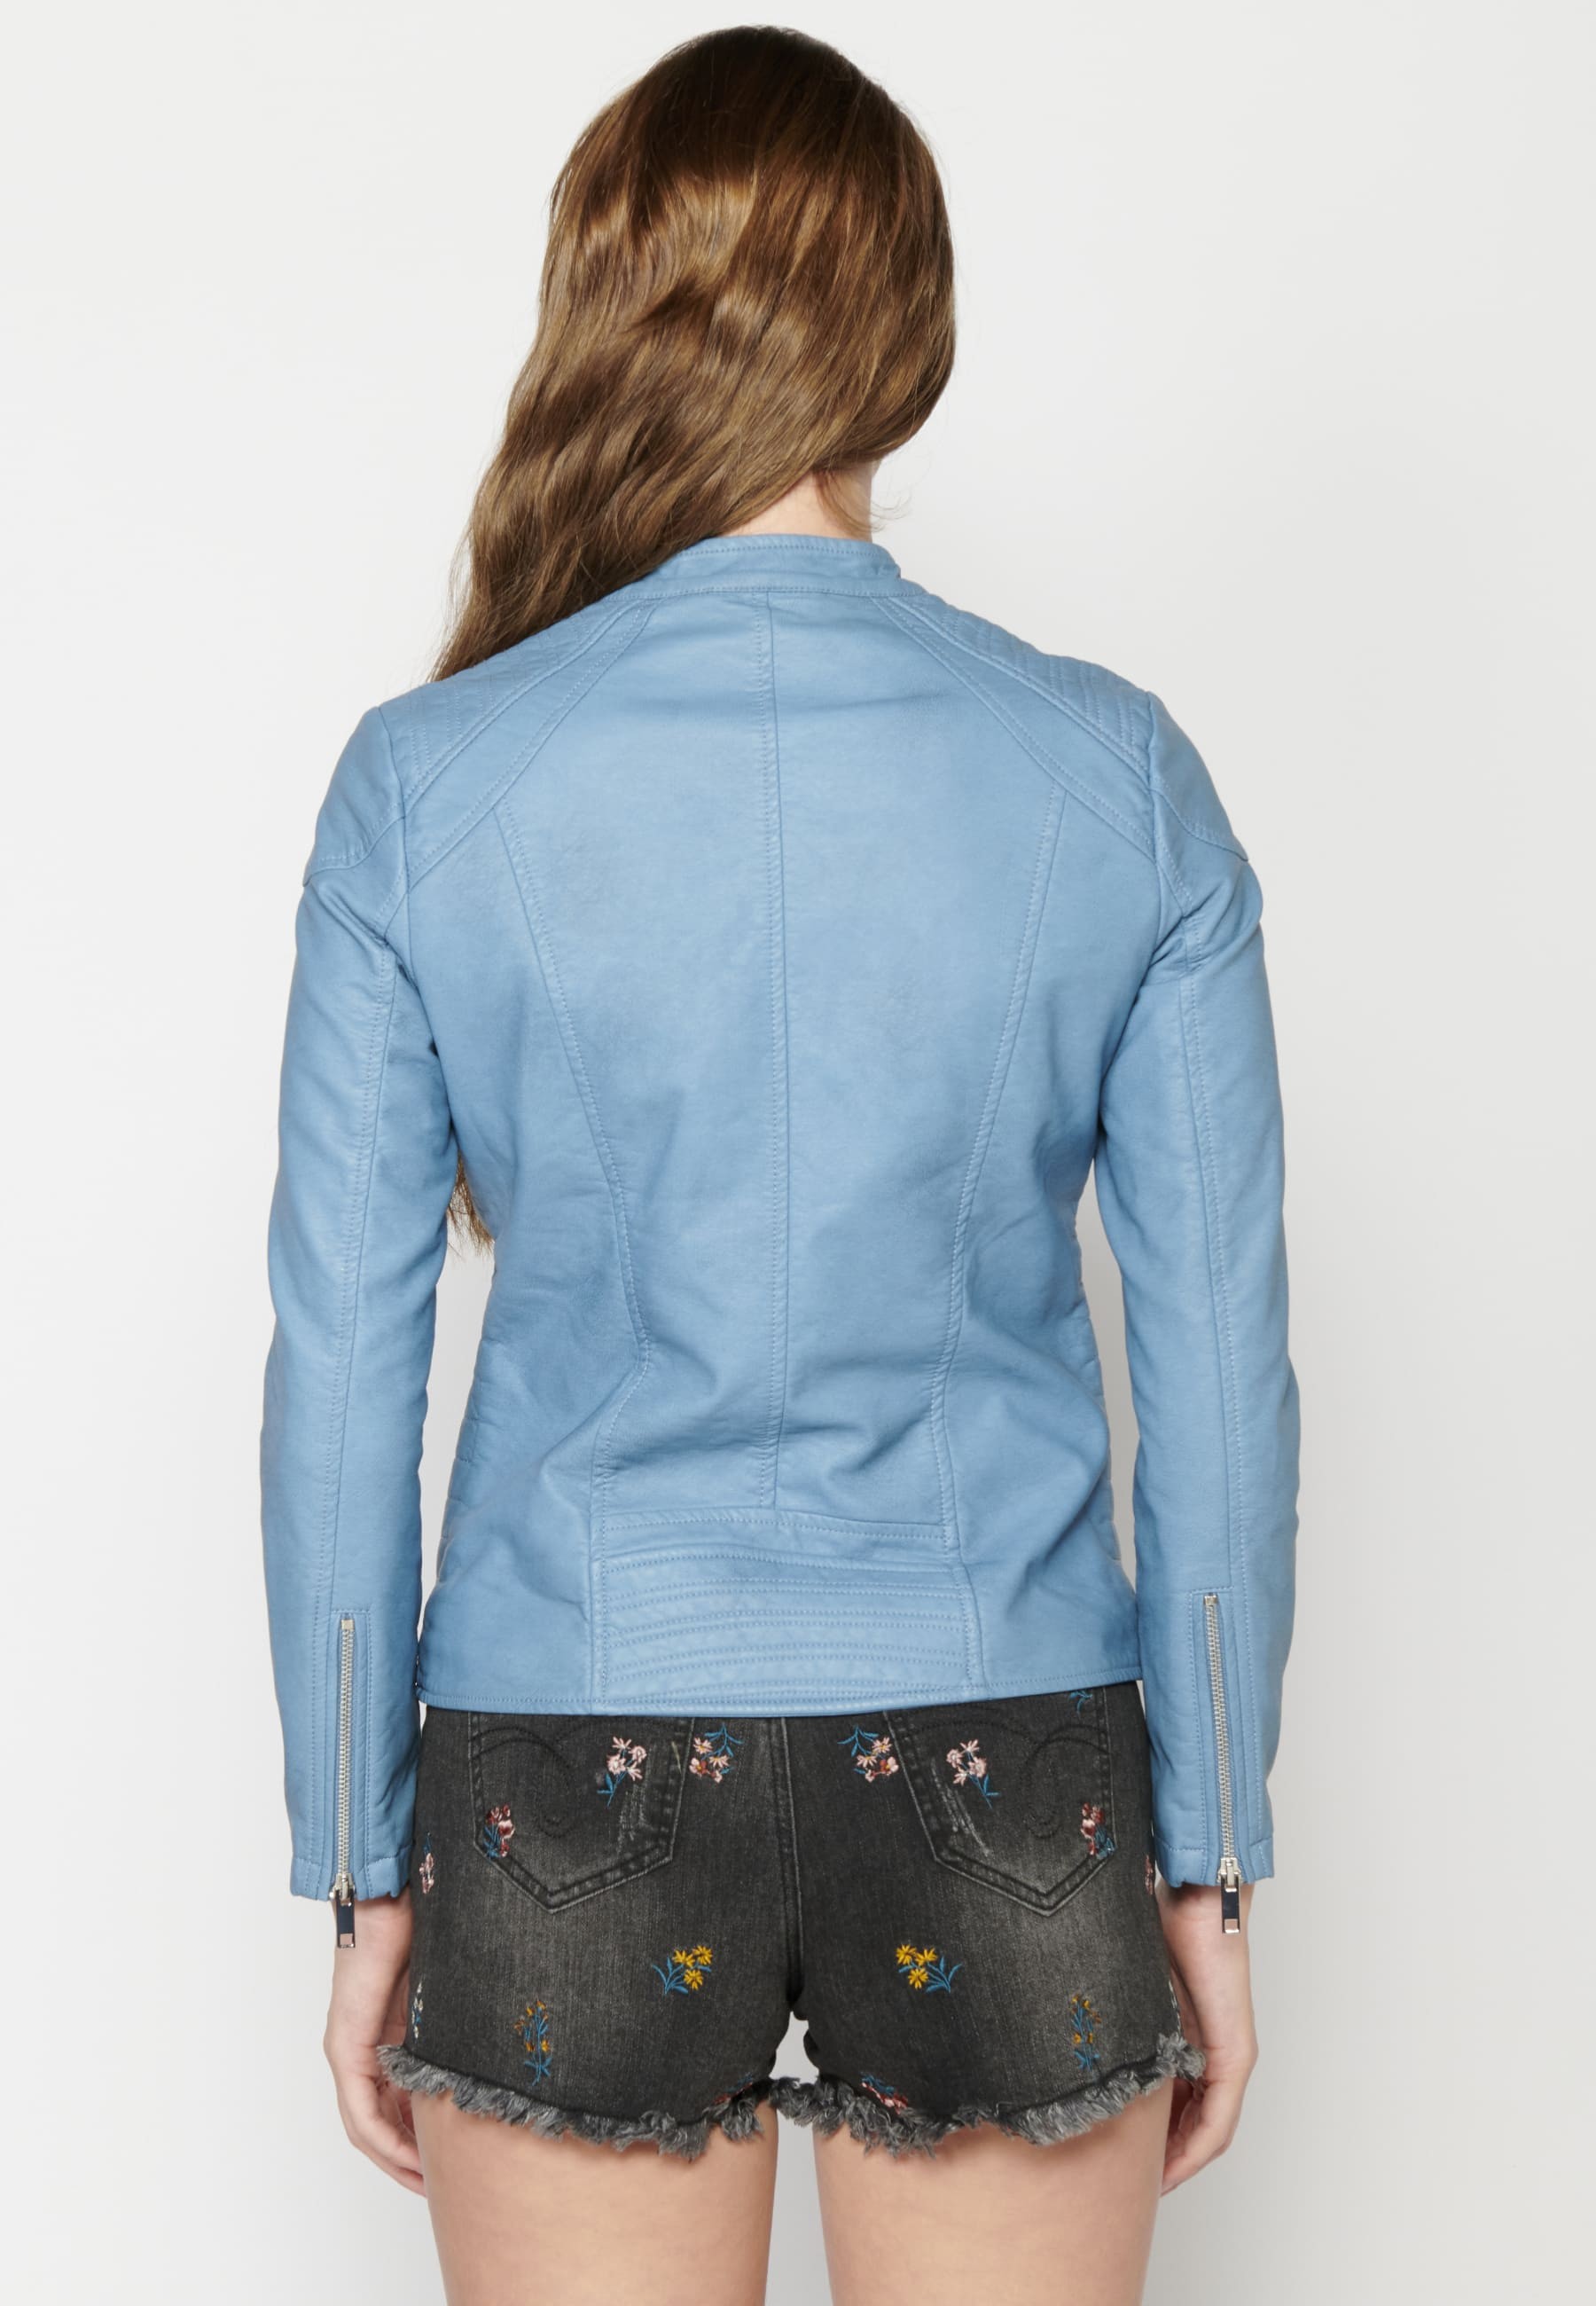 Synthetic leather jacket for women with mandarin collar